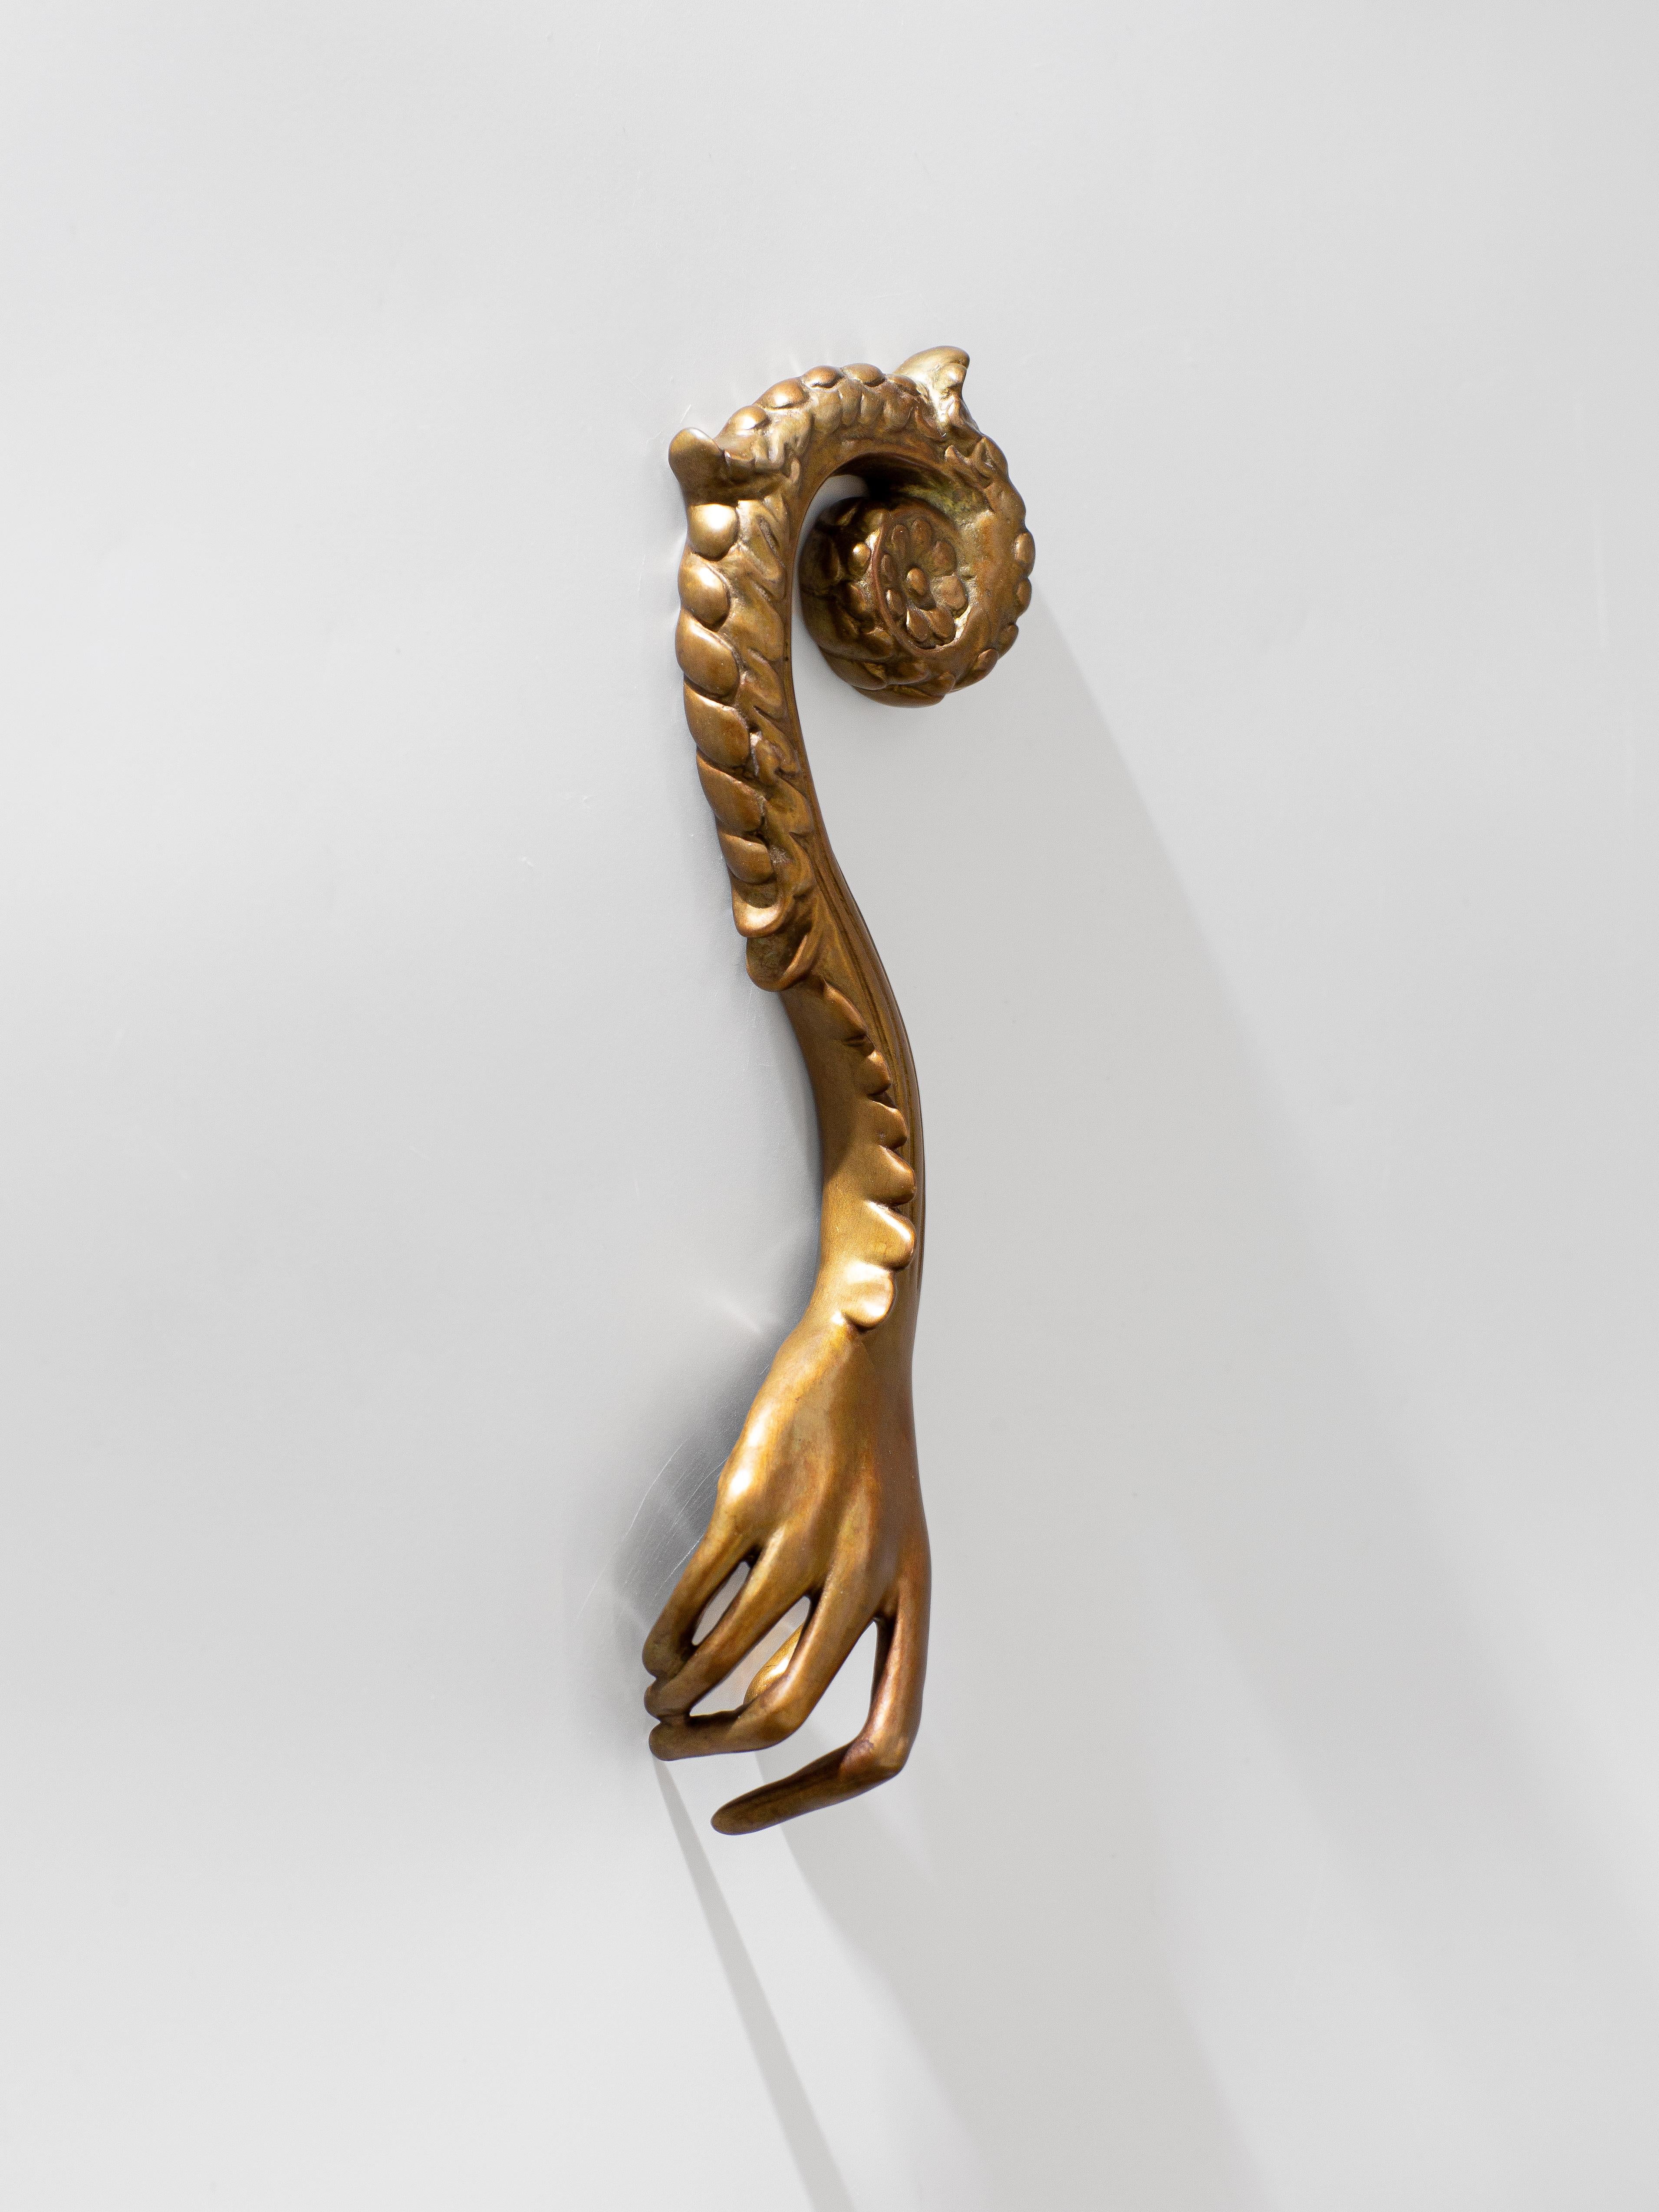 Leslie Fry, Release, Cast bronze, Edition of 10, Cuffed Series, Hand Sculptures For Sale 3